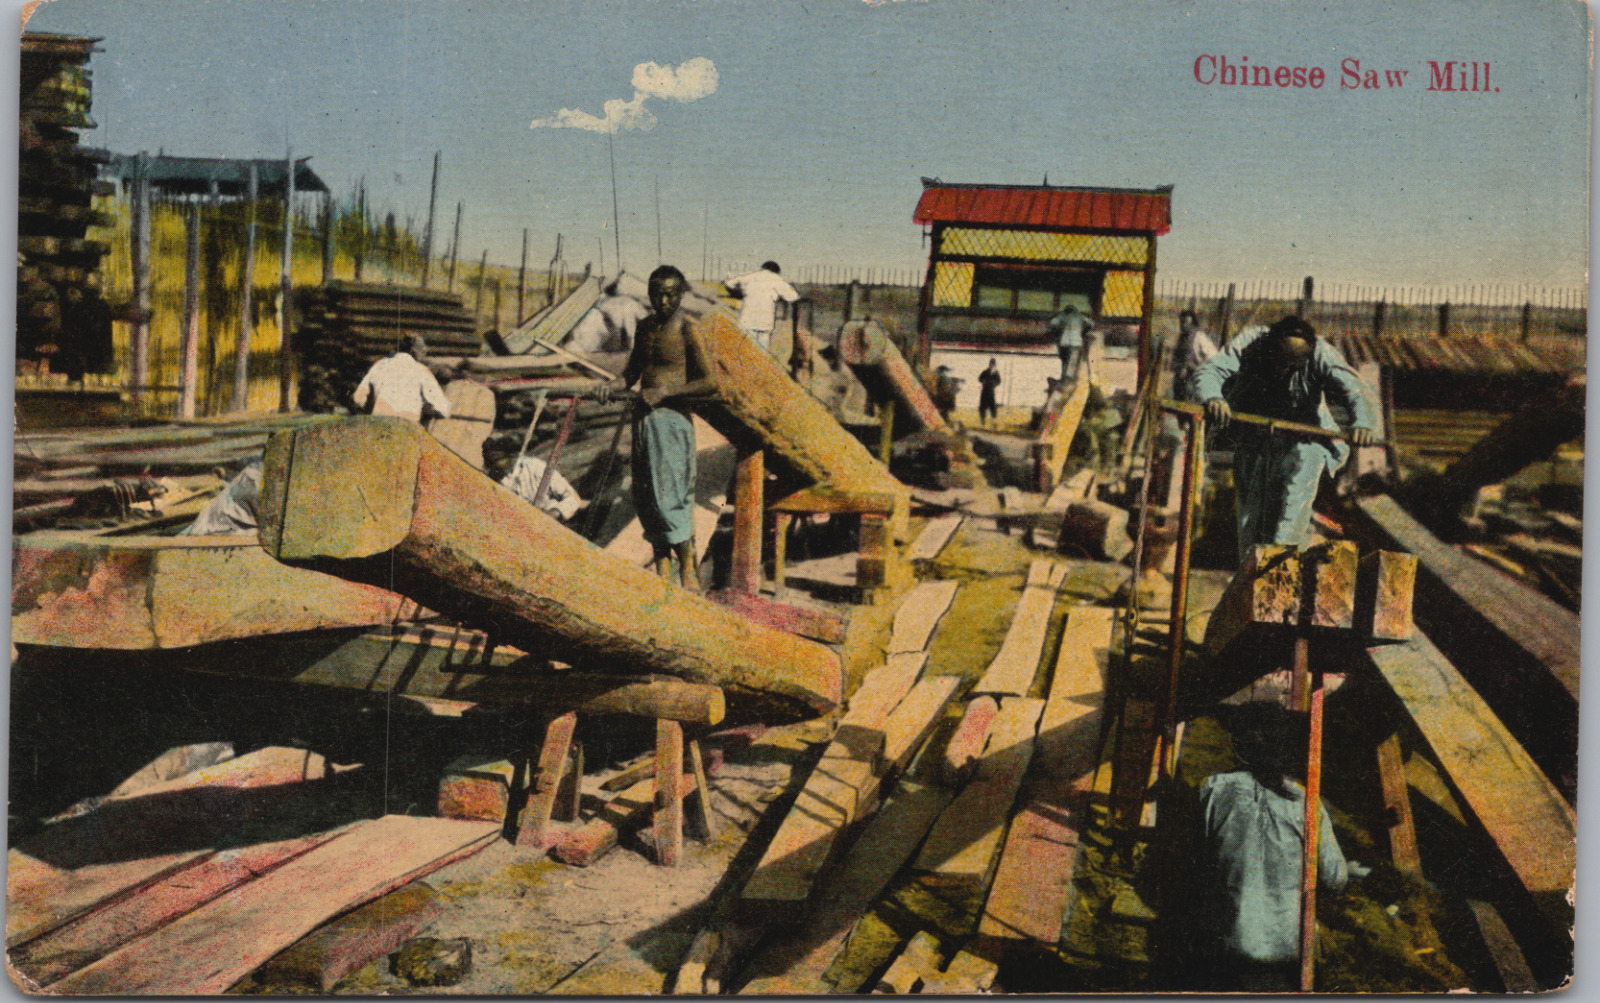 c1910 Shanghai China Chinese Sawmill Workers Frame Pit Saws Wood Sawyers